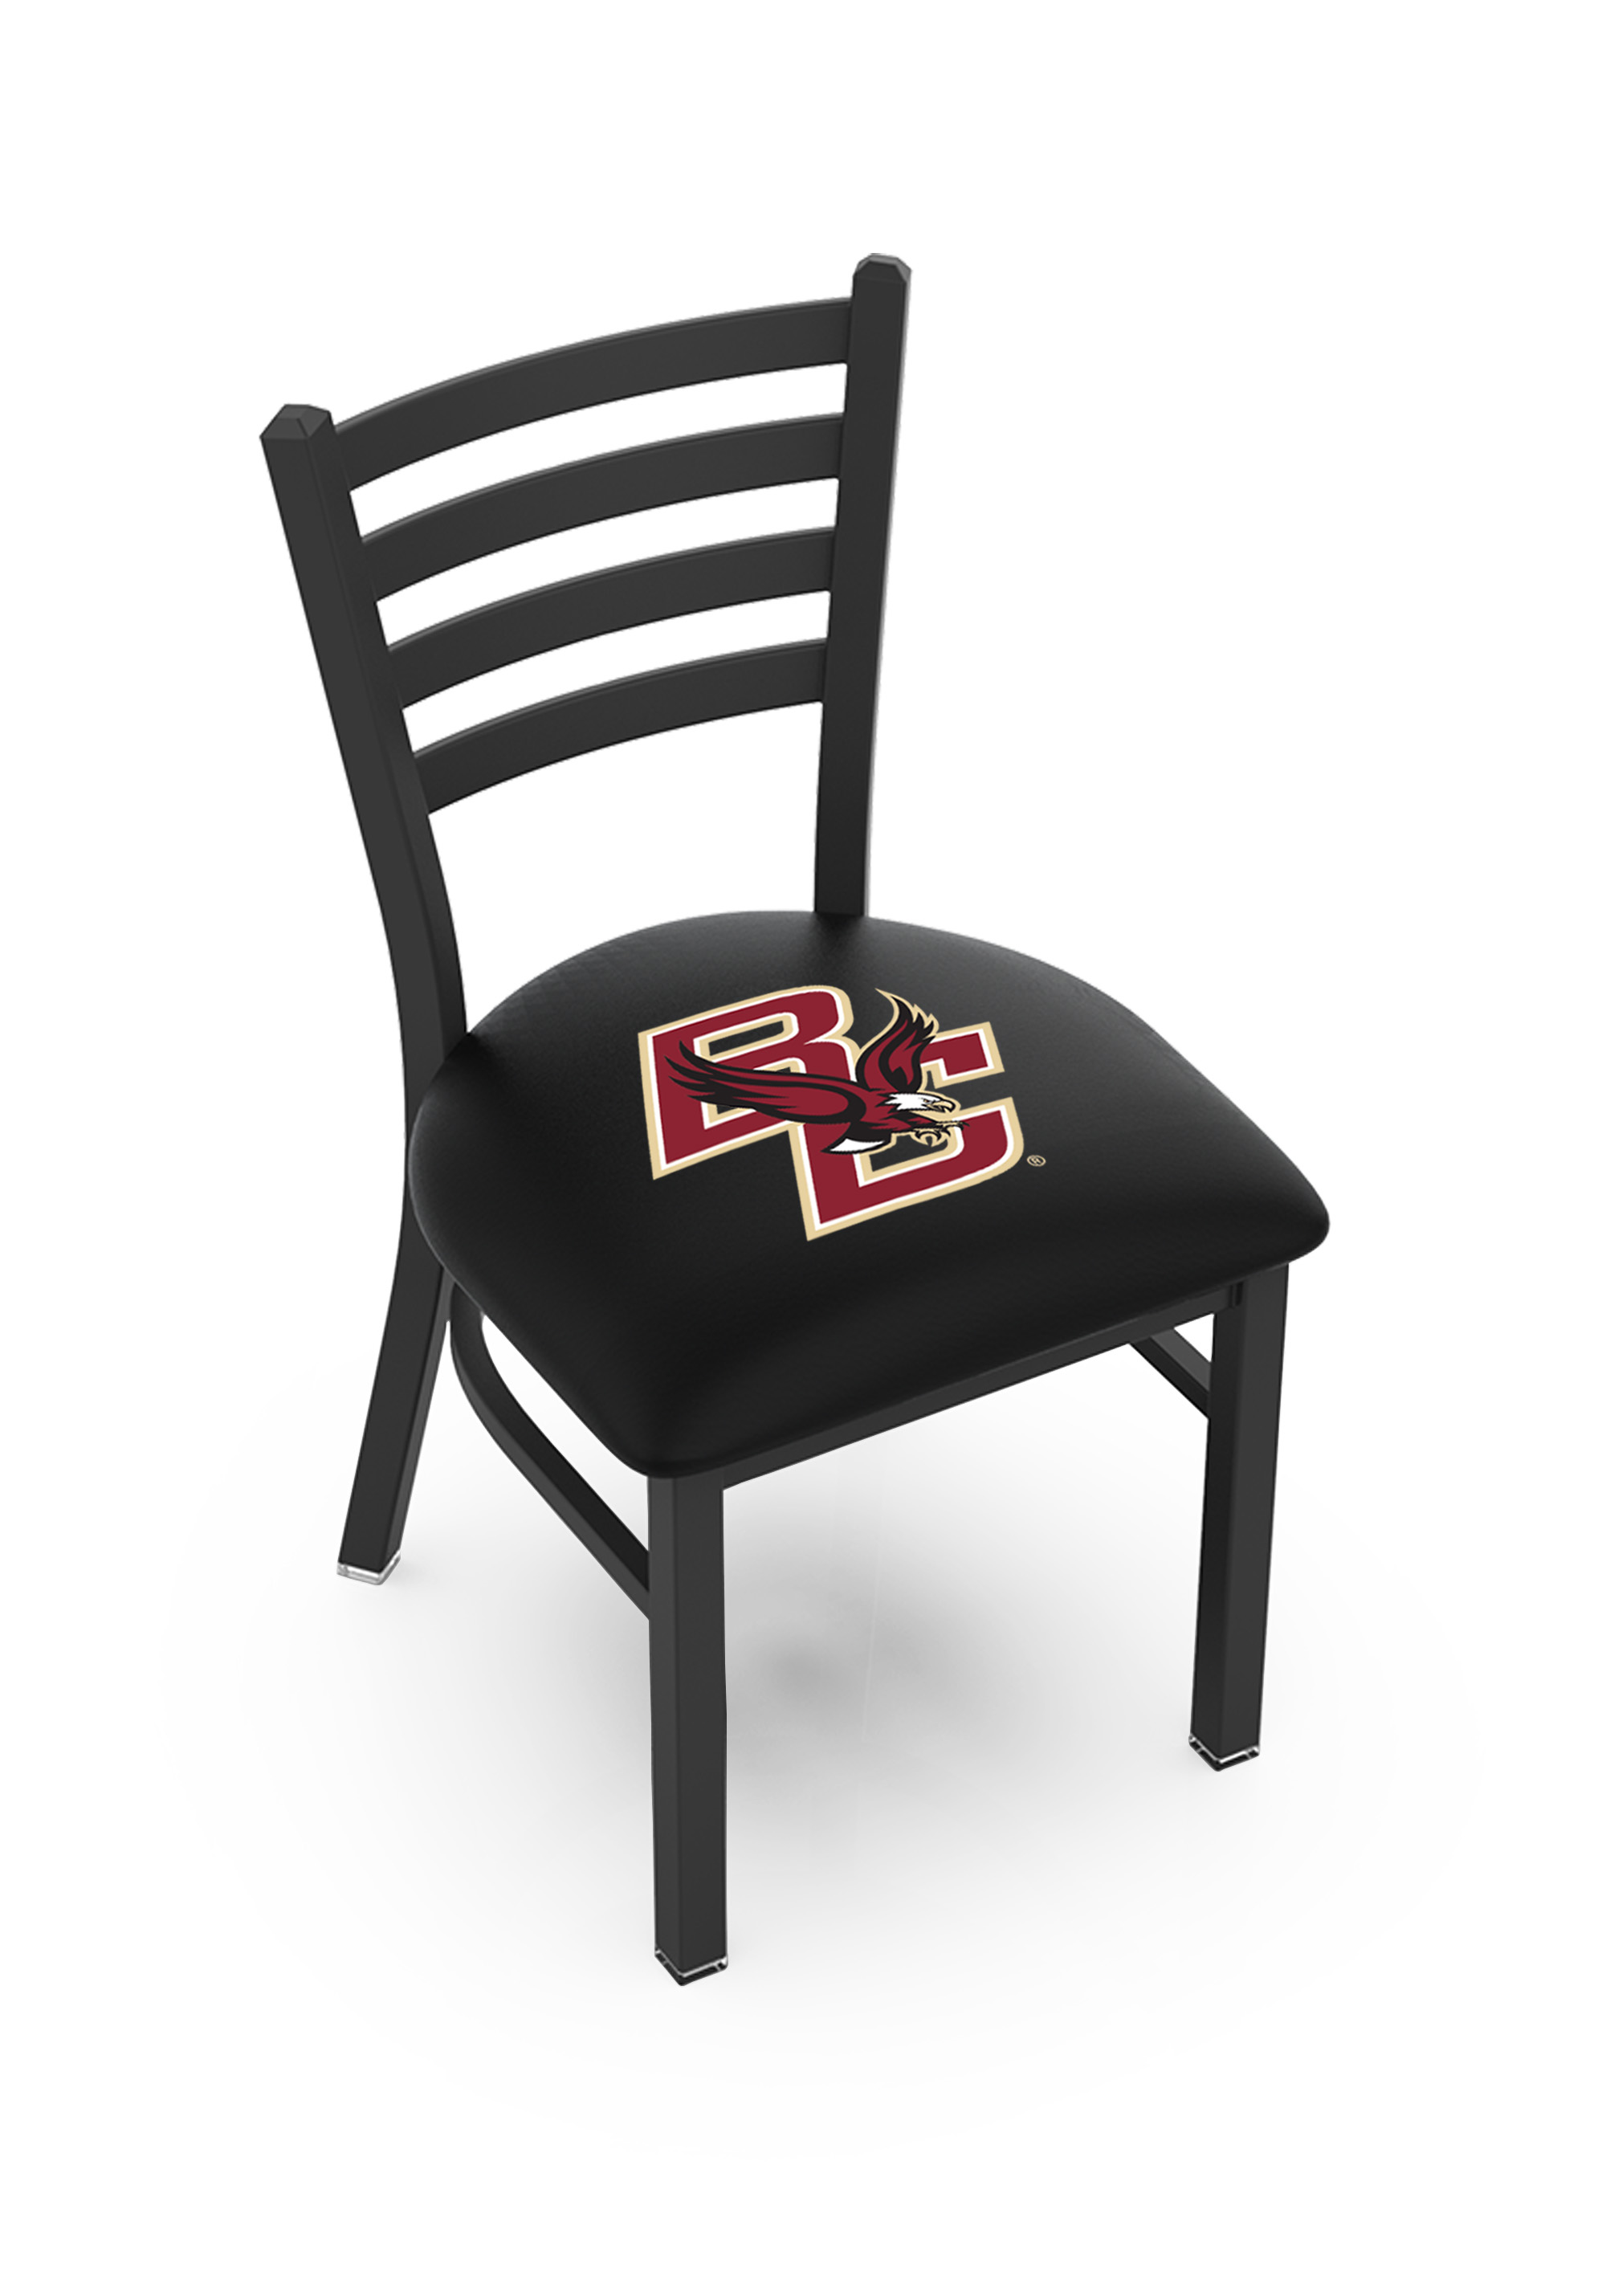 Picture of Holland Bar Stool L00418BostnC 18 in. Boston College Chair with Eagles Logo